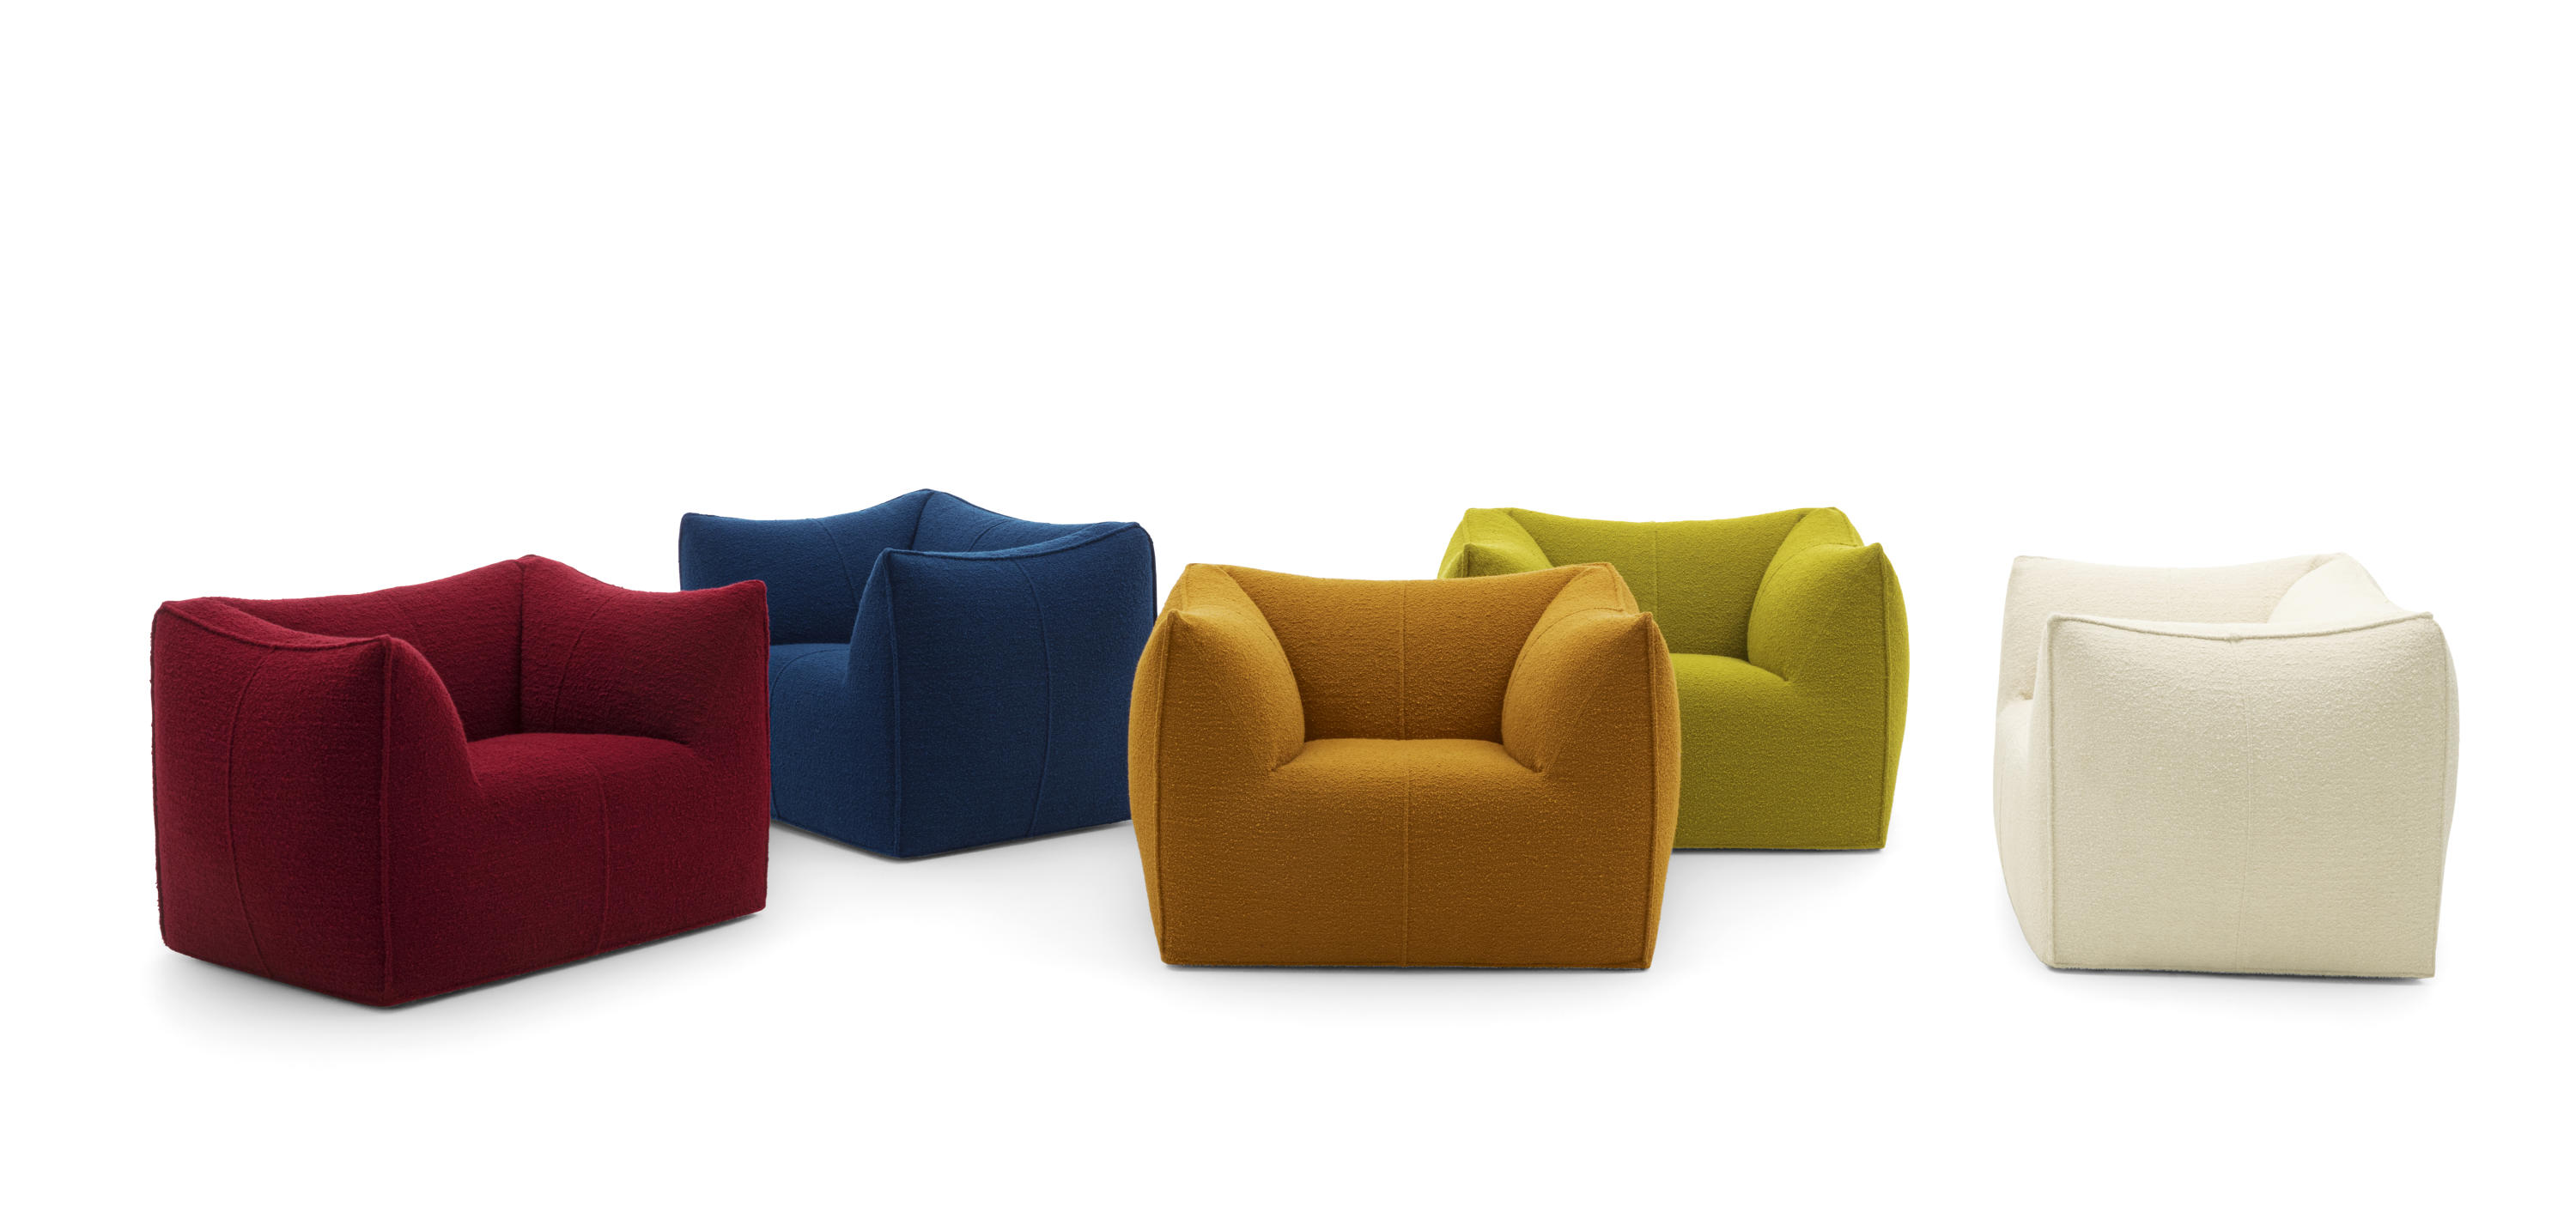 SERIE UP COMPASSO D'ORO Armchair By B&B Italia